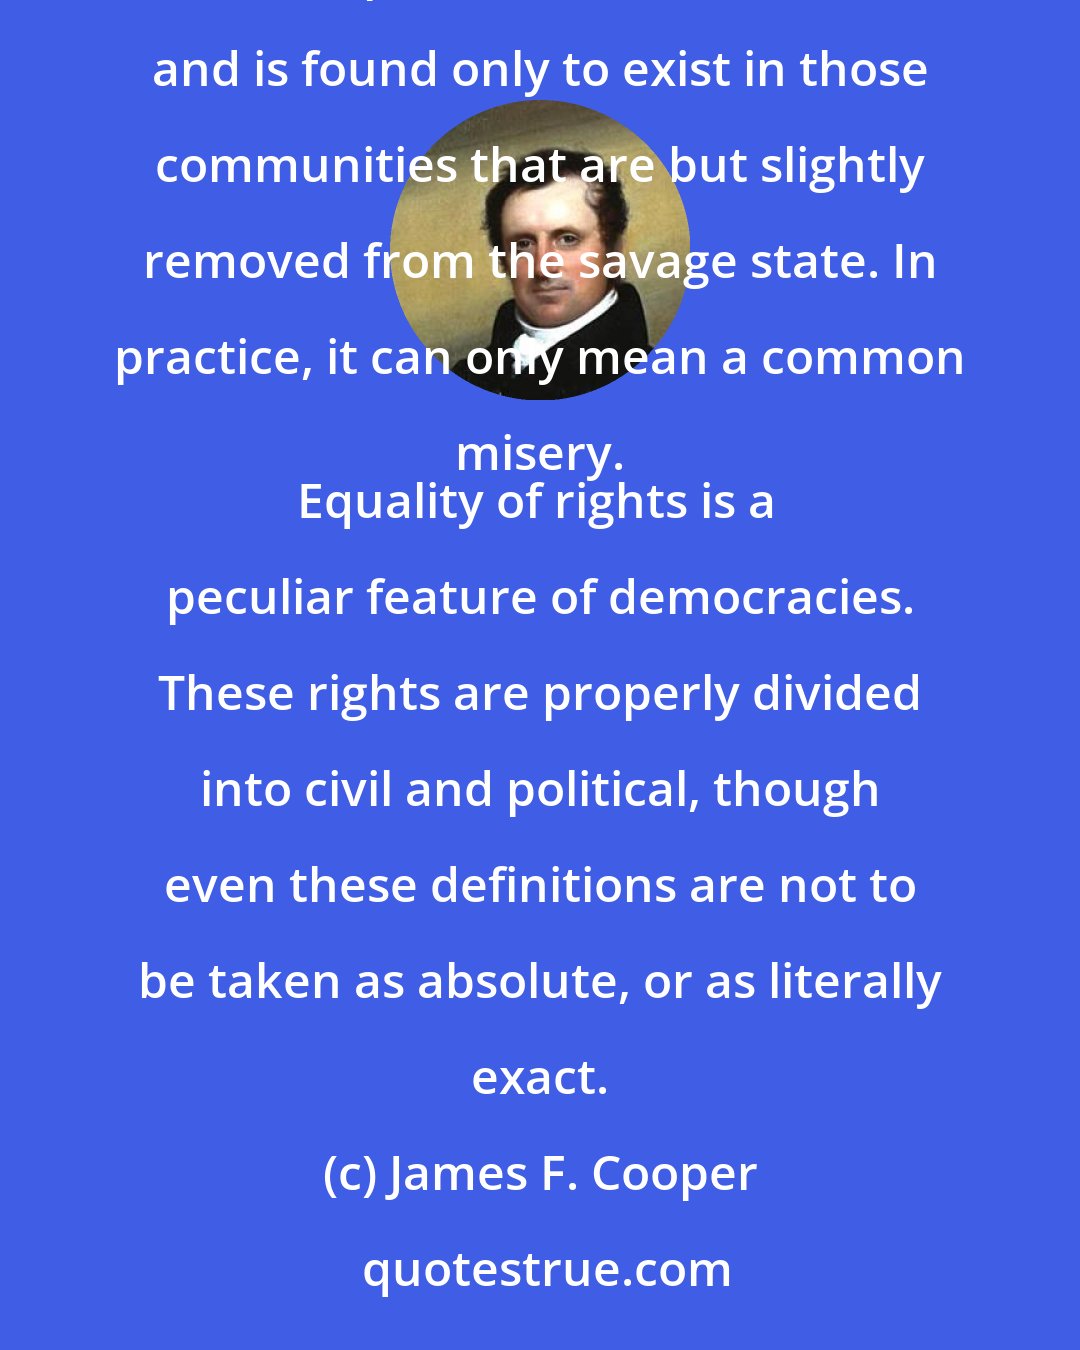 James F. Cooper: Equality, in a social sense, may be divided into that of condition, and that of rights. Equality of condition is incompatible with civilization, and is found only to exist in those communities that are but slightly removed from the savage state. In practice, it can only mean a common misery. 
Equality of rights is a peculiar feature of democracies. These rights are properly divided into civil and political, though even these definitions are not to be taken as absolute, or as literally exact.